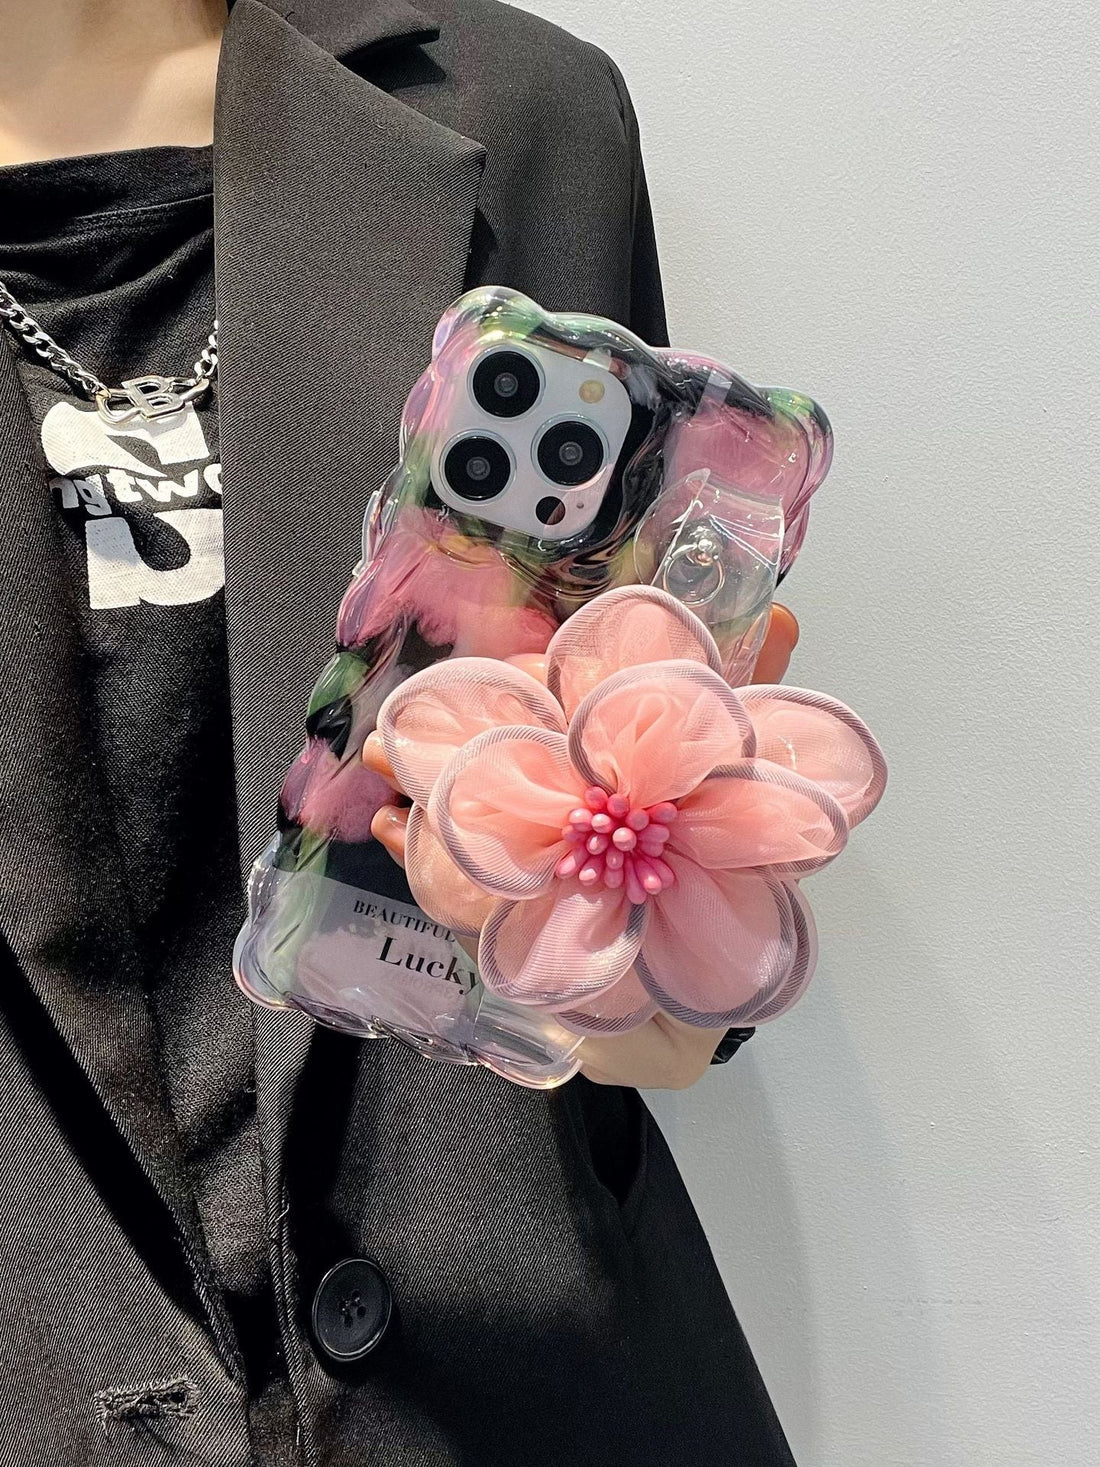 Icy Black Pink Flower Wristband iPhone Case with Messenger Strap